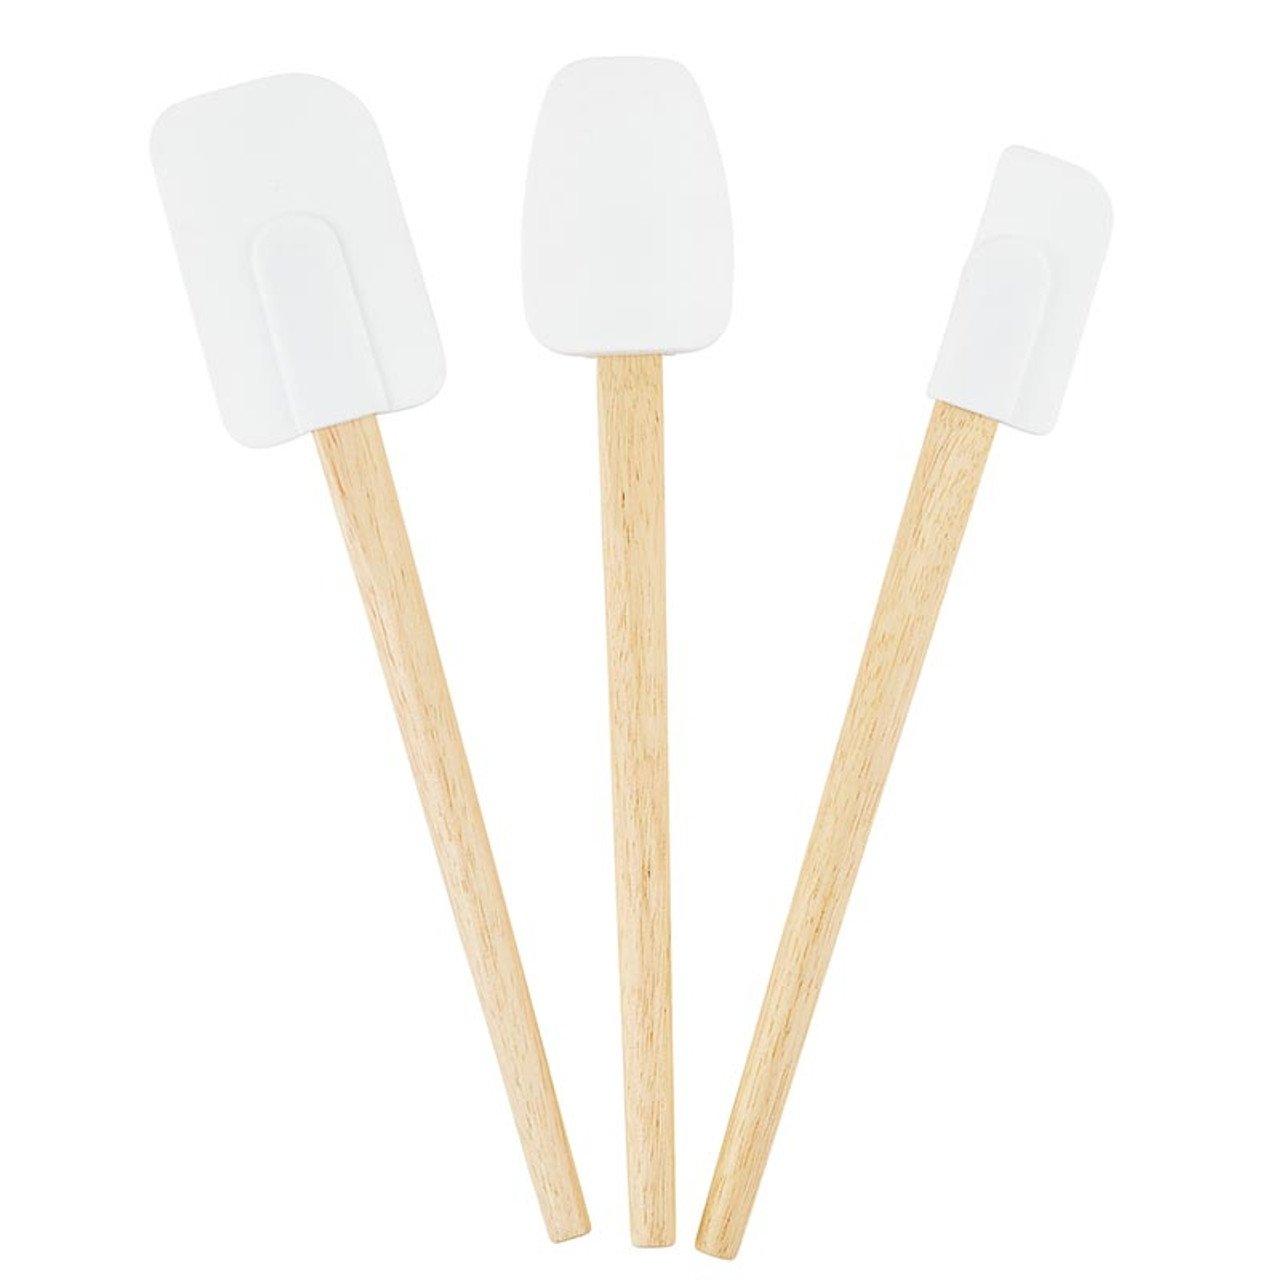 Bake More & Share Baking Tools Book Style Box | 3 Piece Spatulas | Giftable by The Bullish Store - Vysn